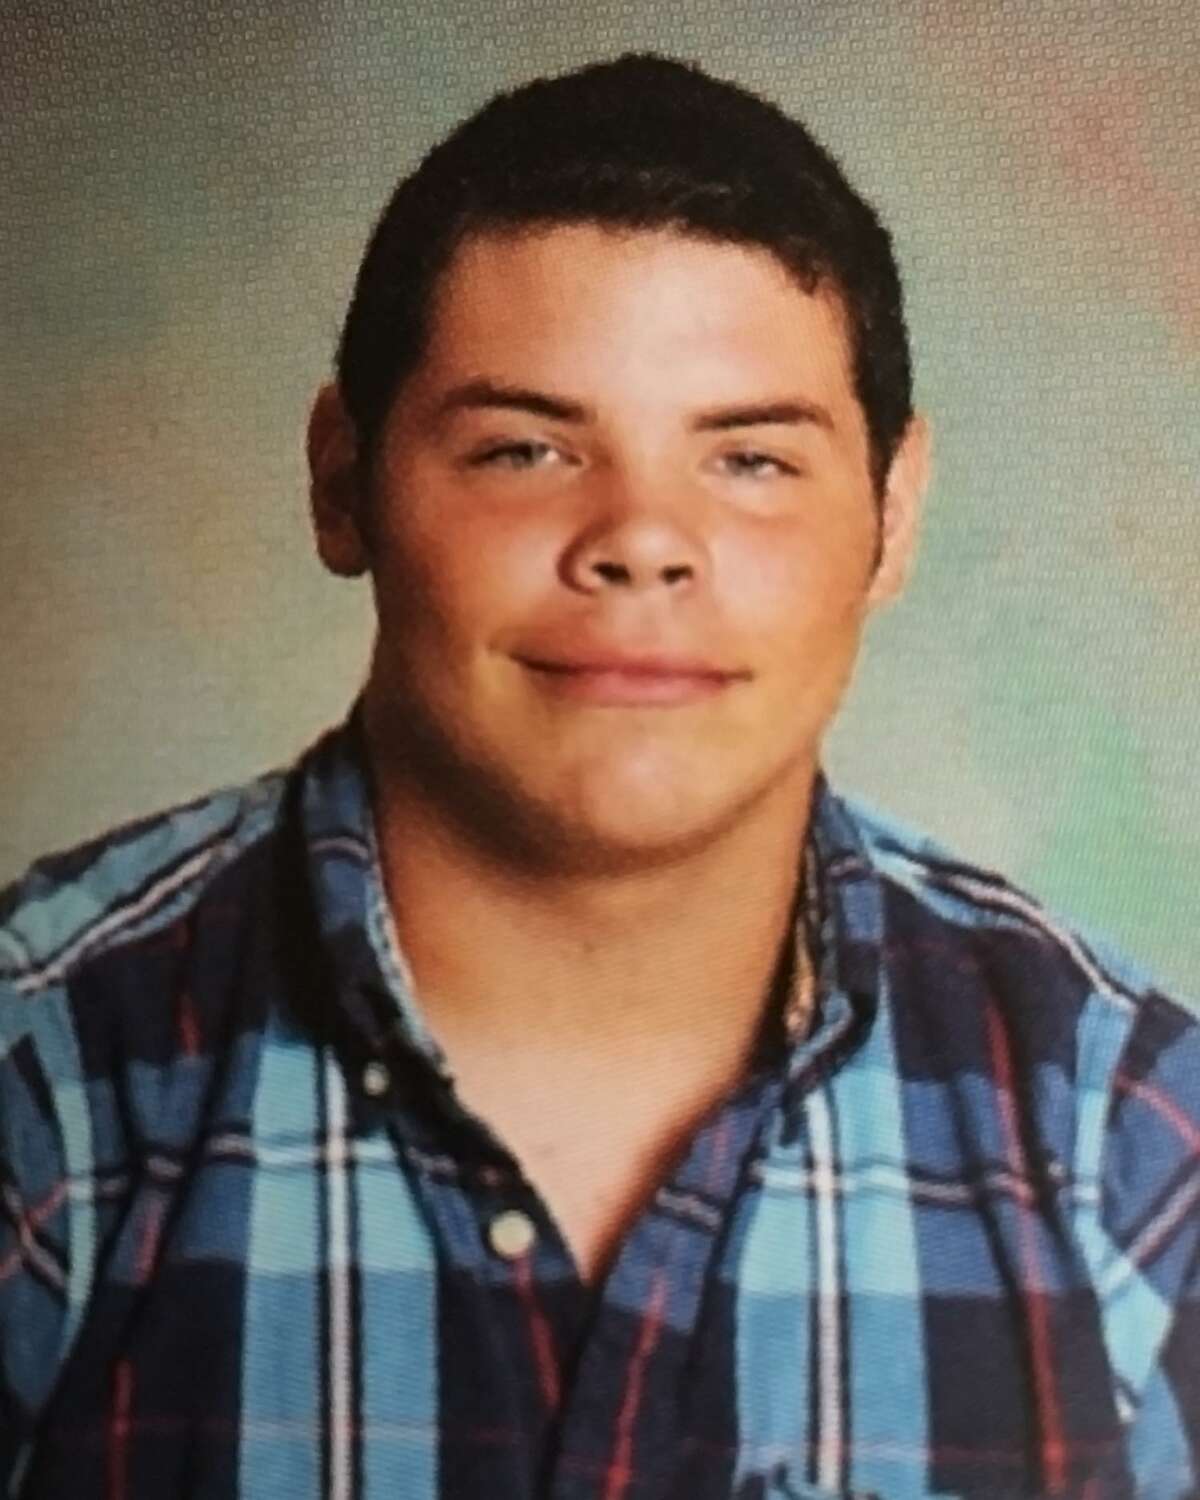 Jack Young, a photo from the Leakey High School yearbook. Young was the driver of a pickup truck which was in a head-on collision with a van resulting in deaths of 13 people.